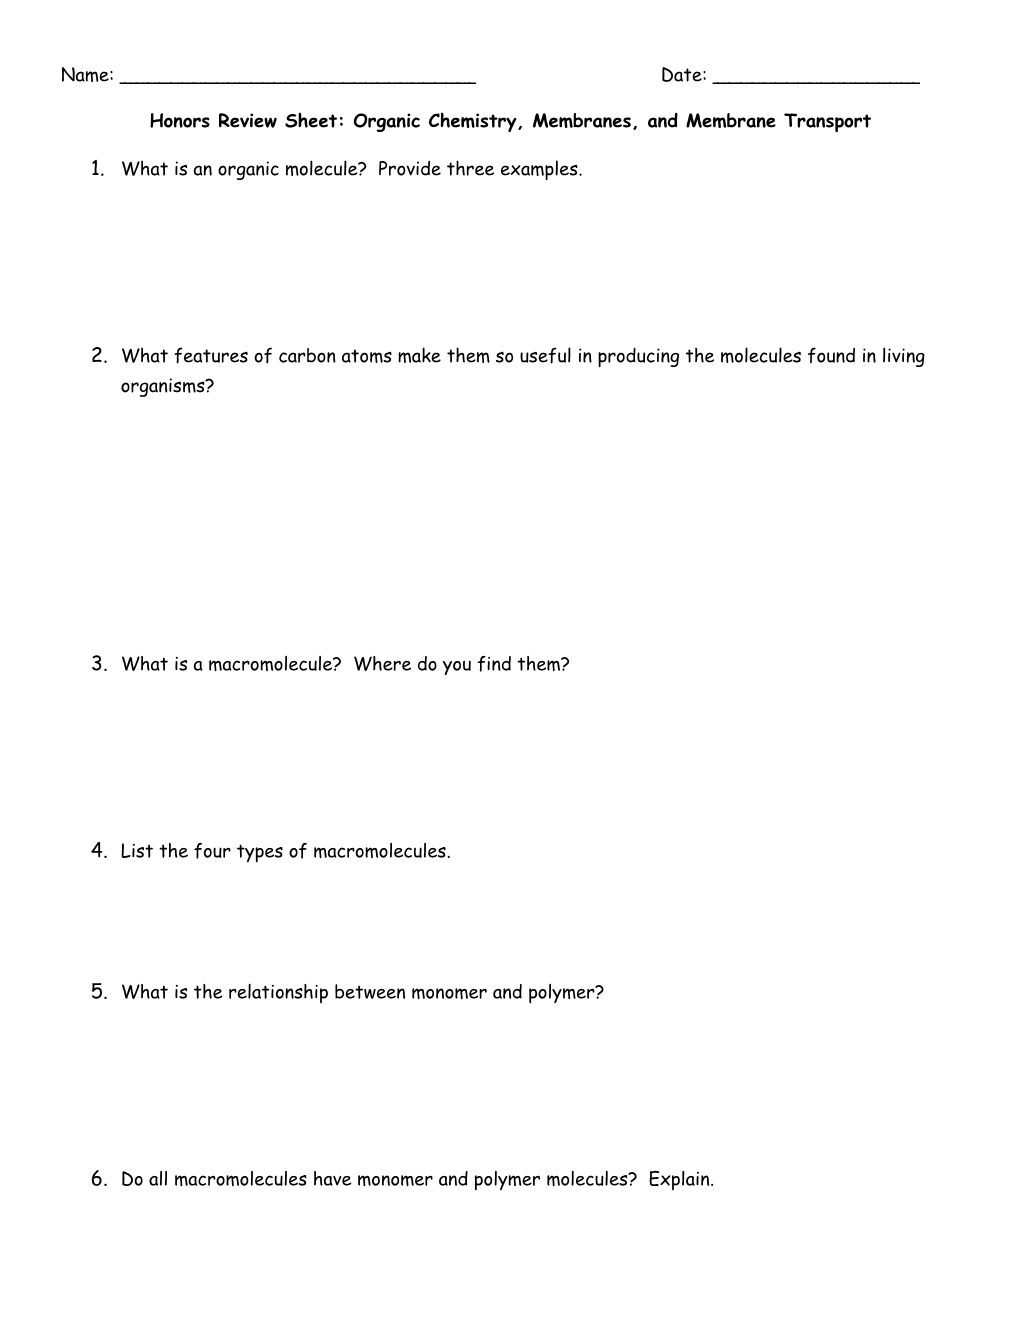 Honors Review Sheet: Organic Chemistry, Membranes, and Membrane Transport